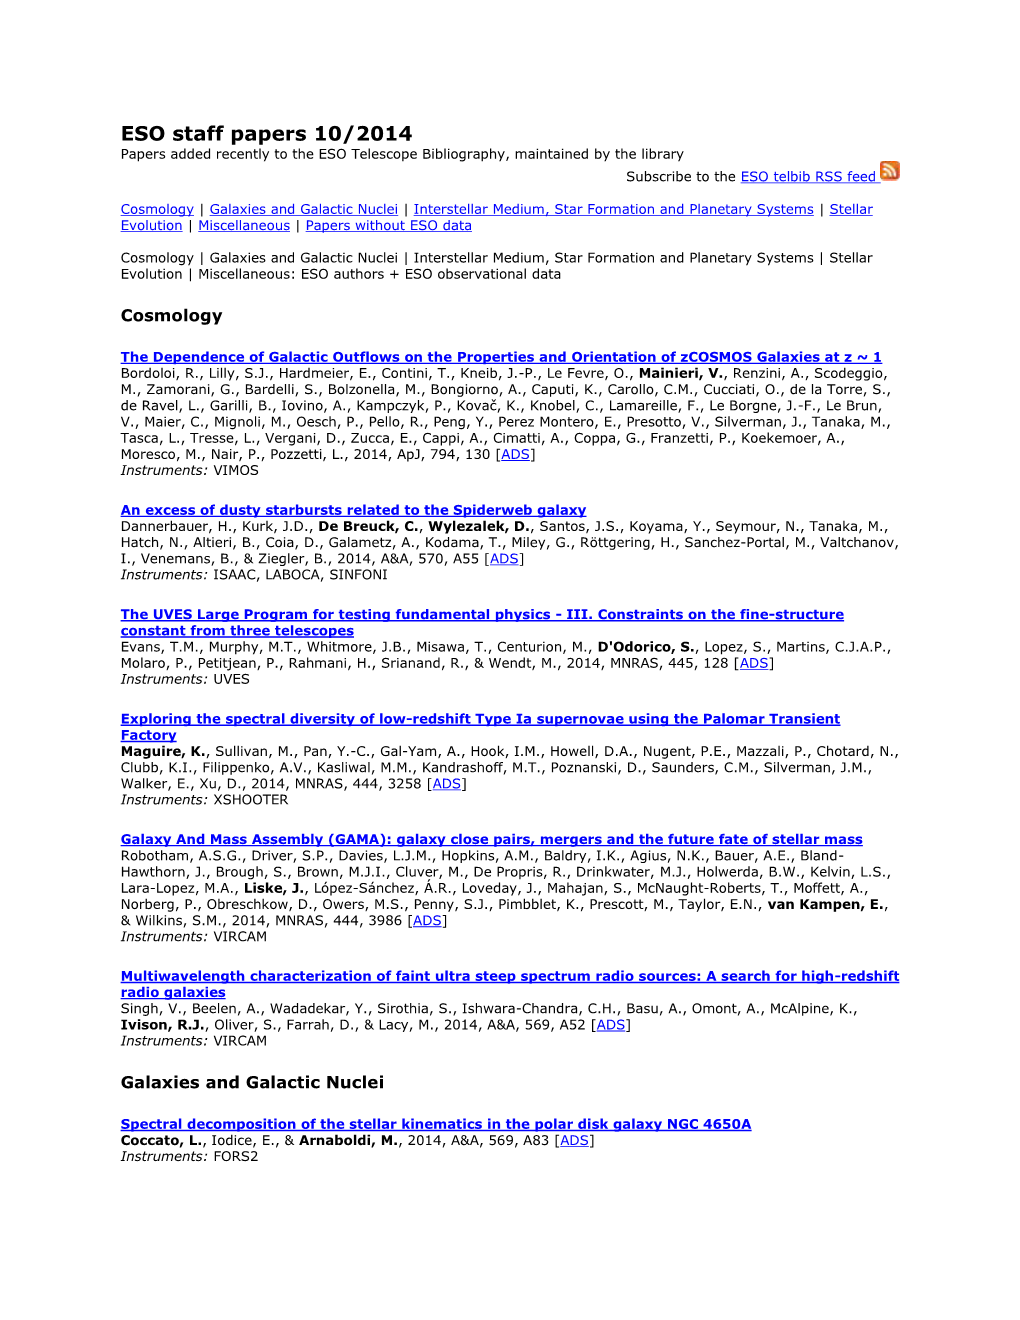 ESO Staff Papers 10/2014 Papers Added Recently to the ESO Telescope Bibliography, Maintained by the Library Subscribe to the ESO Telbib RSS Feed